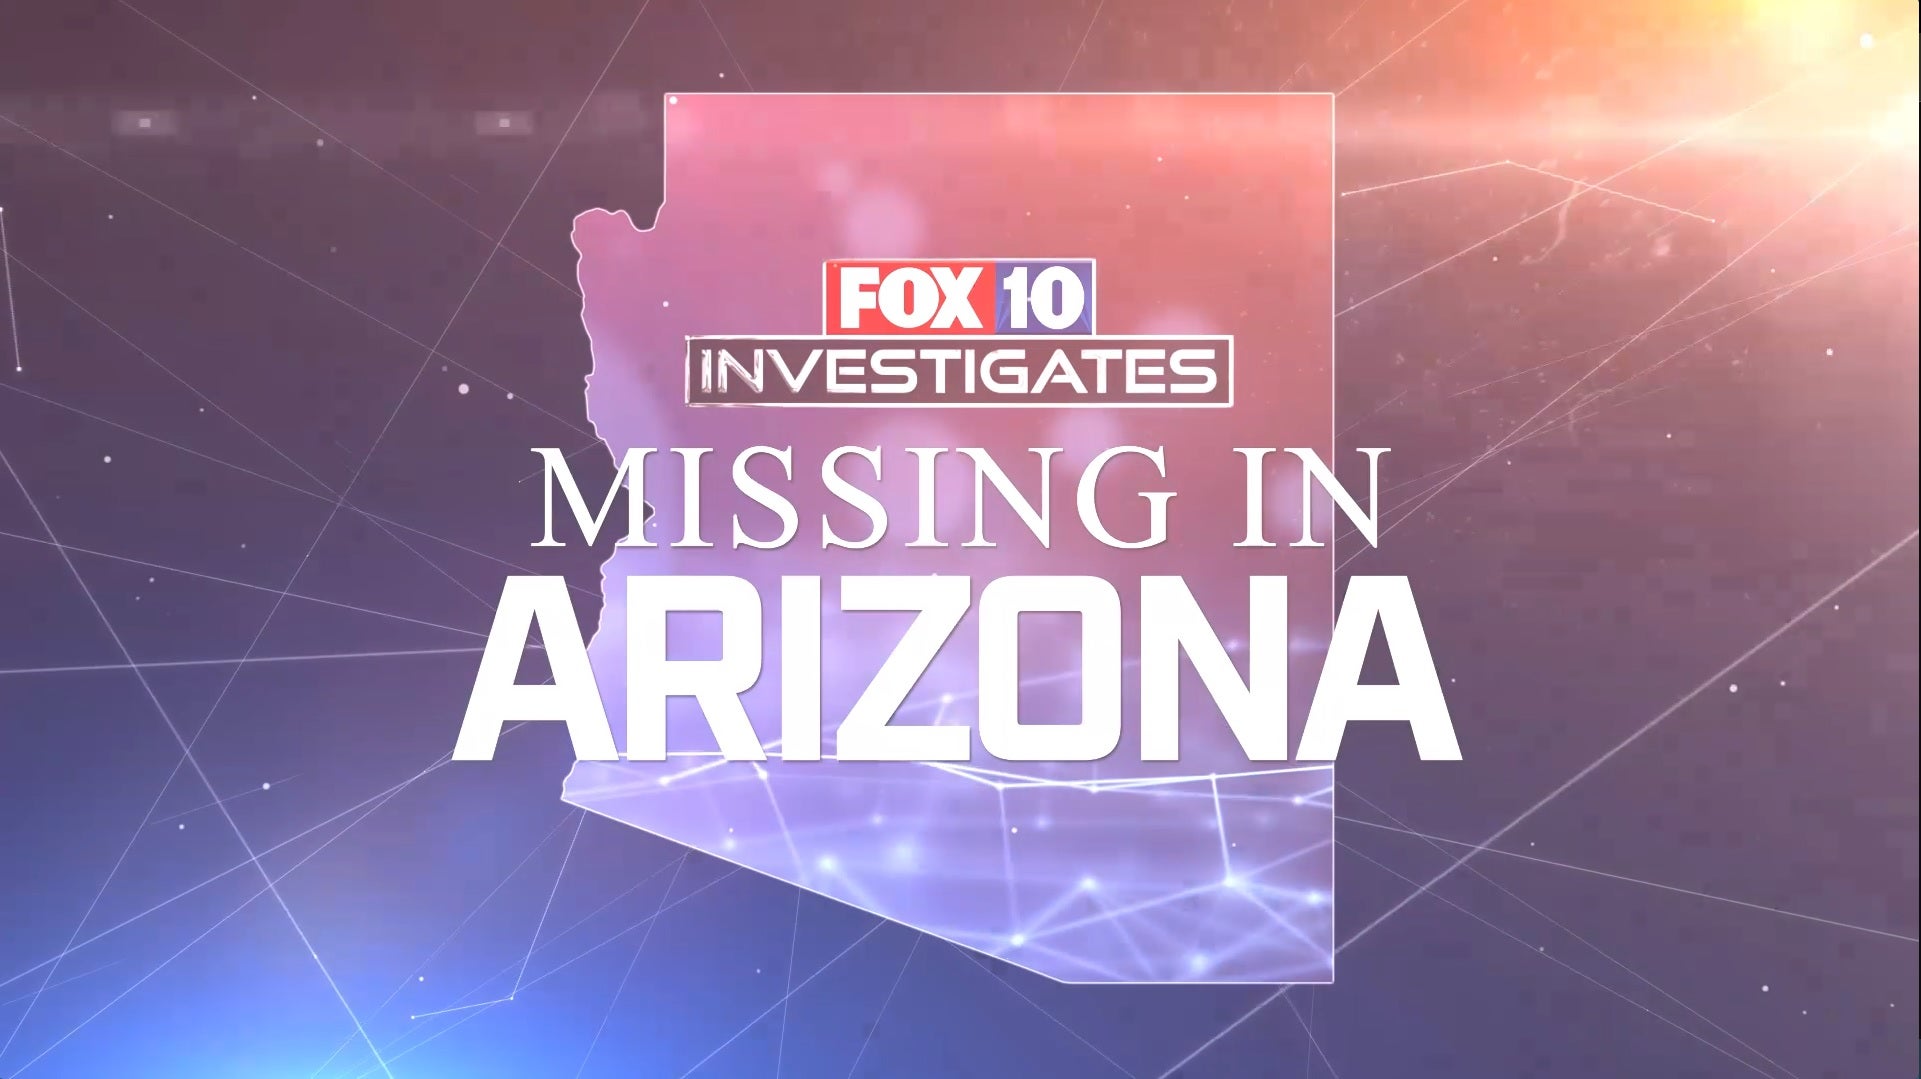 If you have a missing persons case you think should be spotlighted, click here to email us